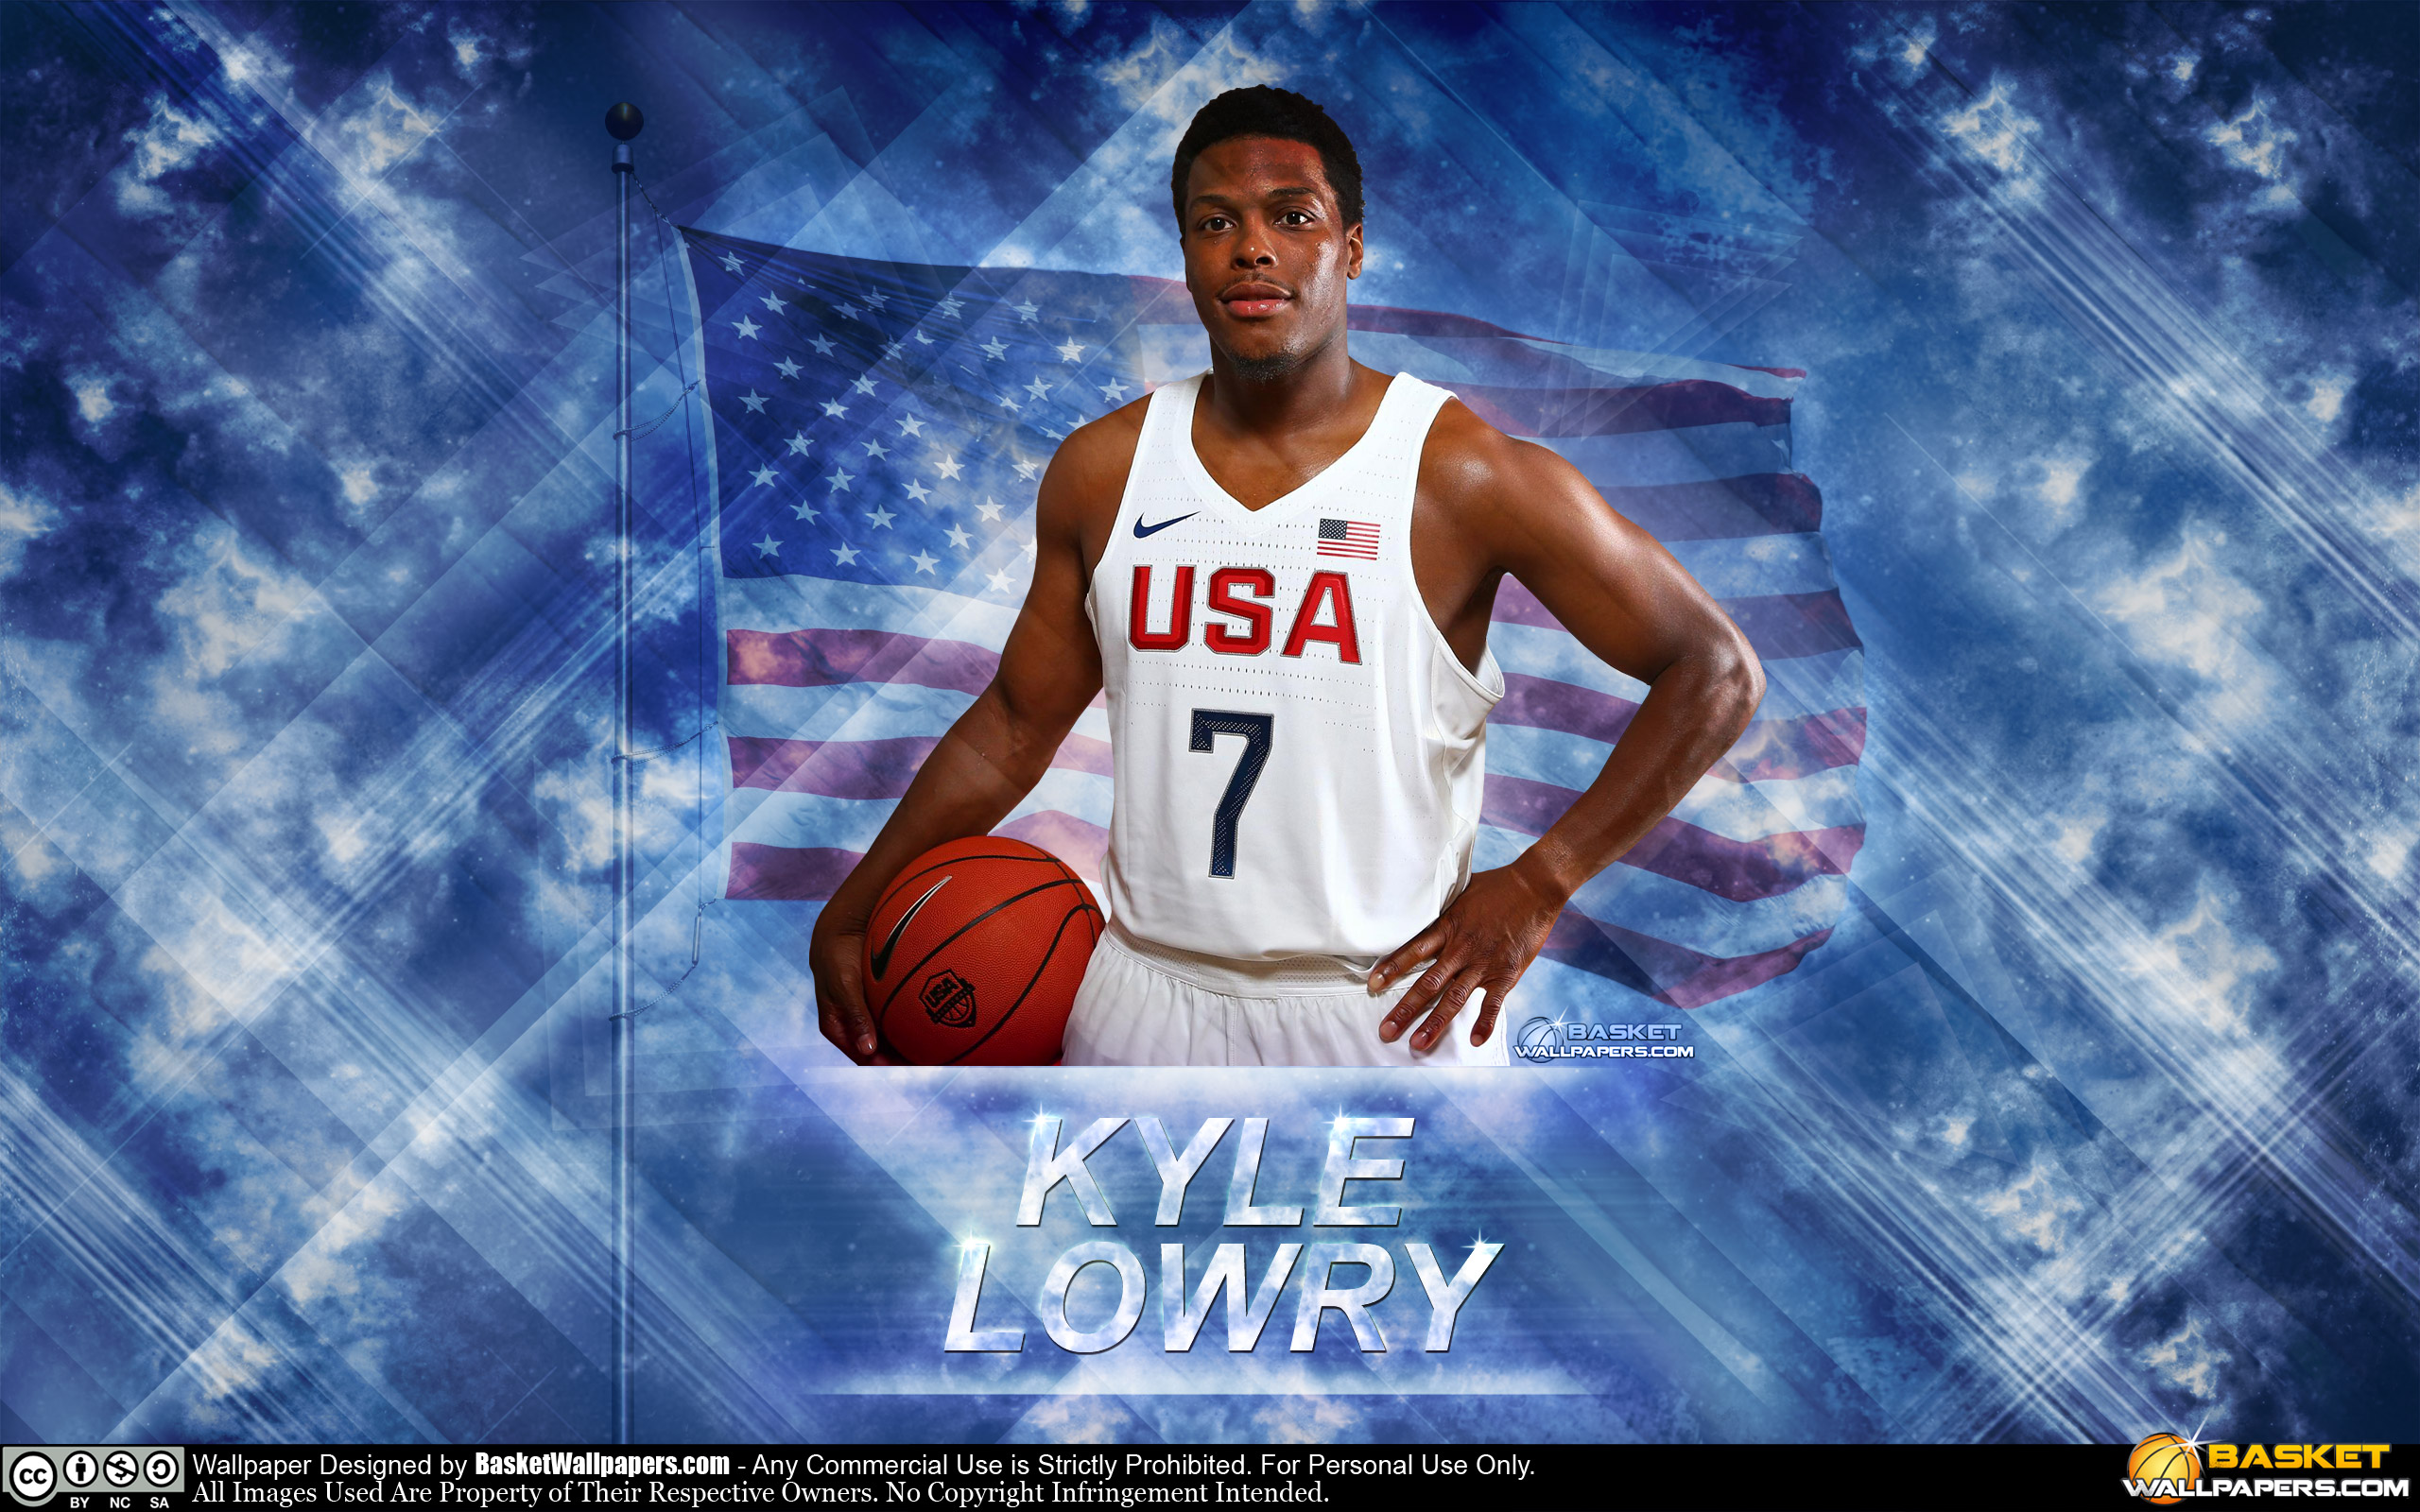 Kyle Lowry Wallpapers Basketball Wallpapers at BasketWallpaperscom 2560x1600